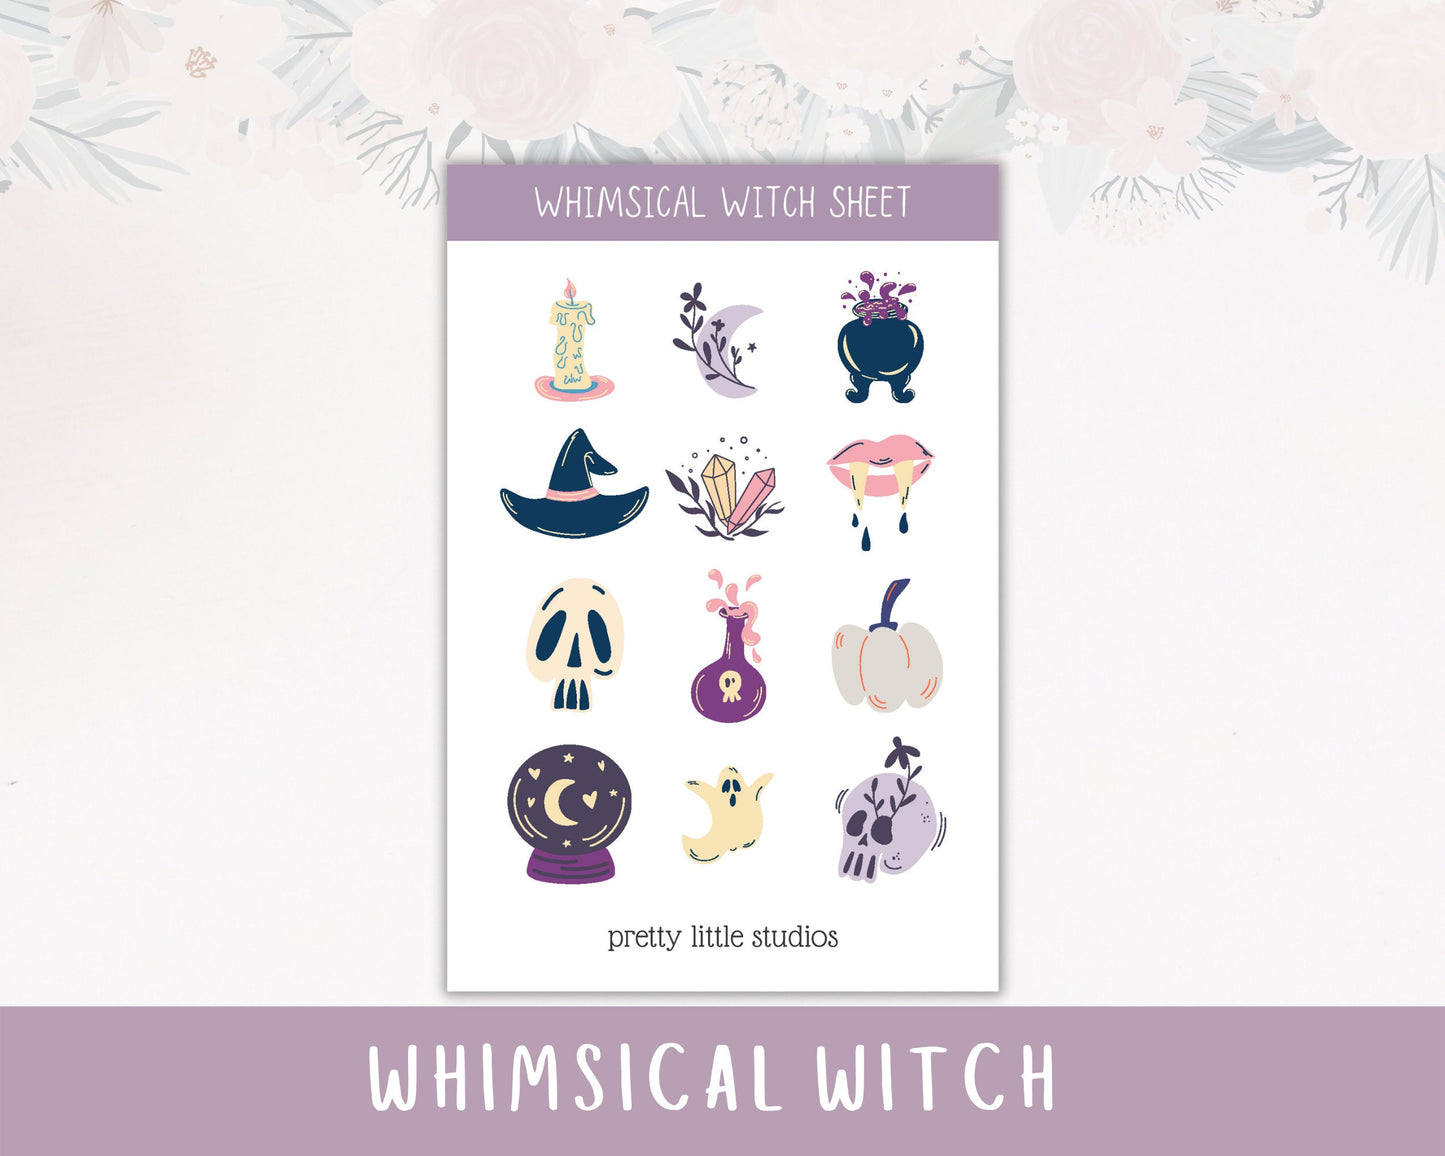 Whimsical Witch Decorative Sticker Sheet - Bullet Journal Stickers - Planner Stickers - Witchy Stickers - Halloween Stickers